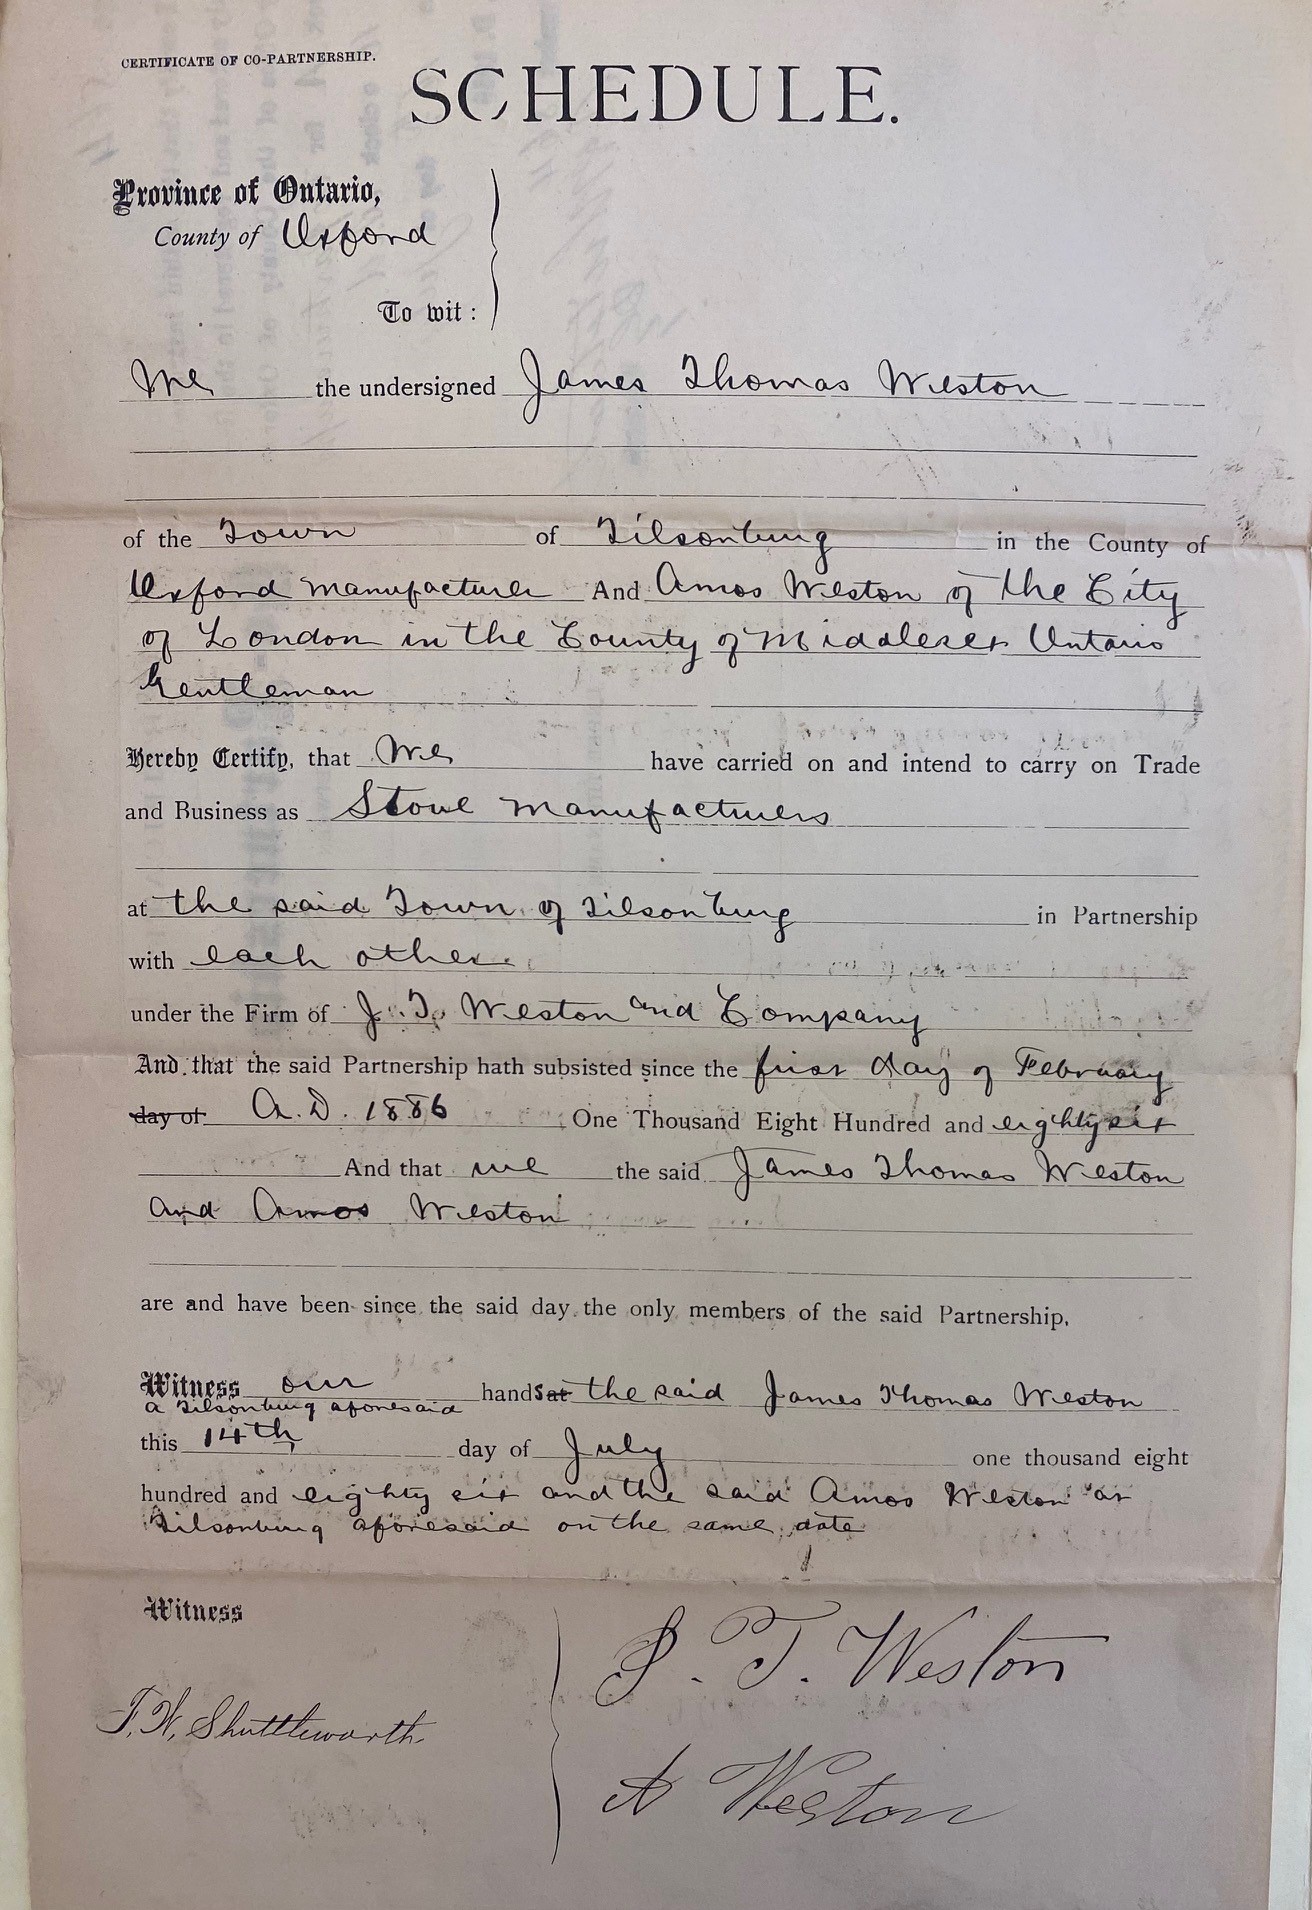 Declaration of partnership form filled out by James Weston and Amos Weston.